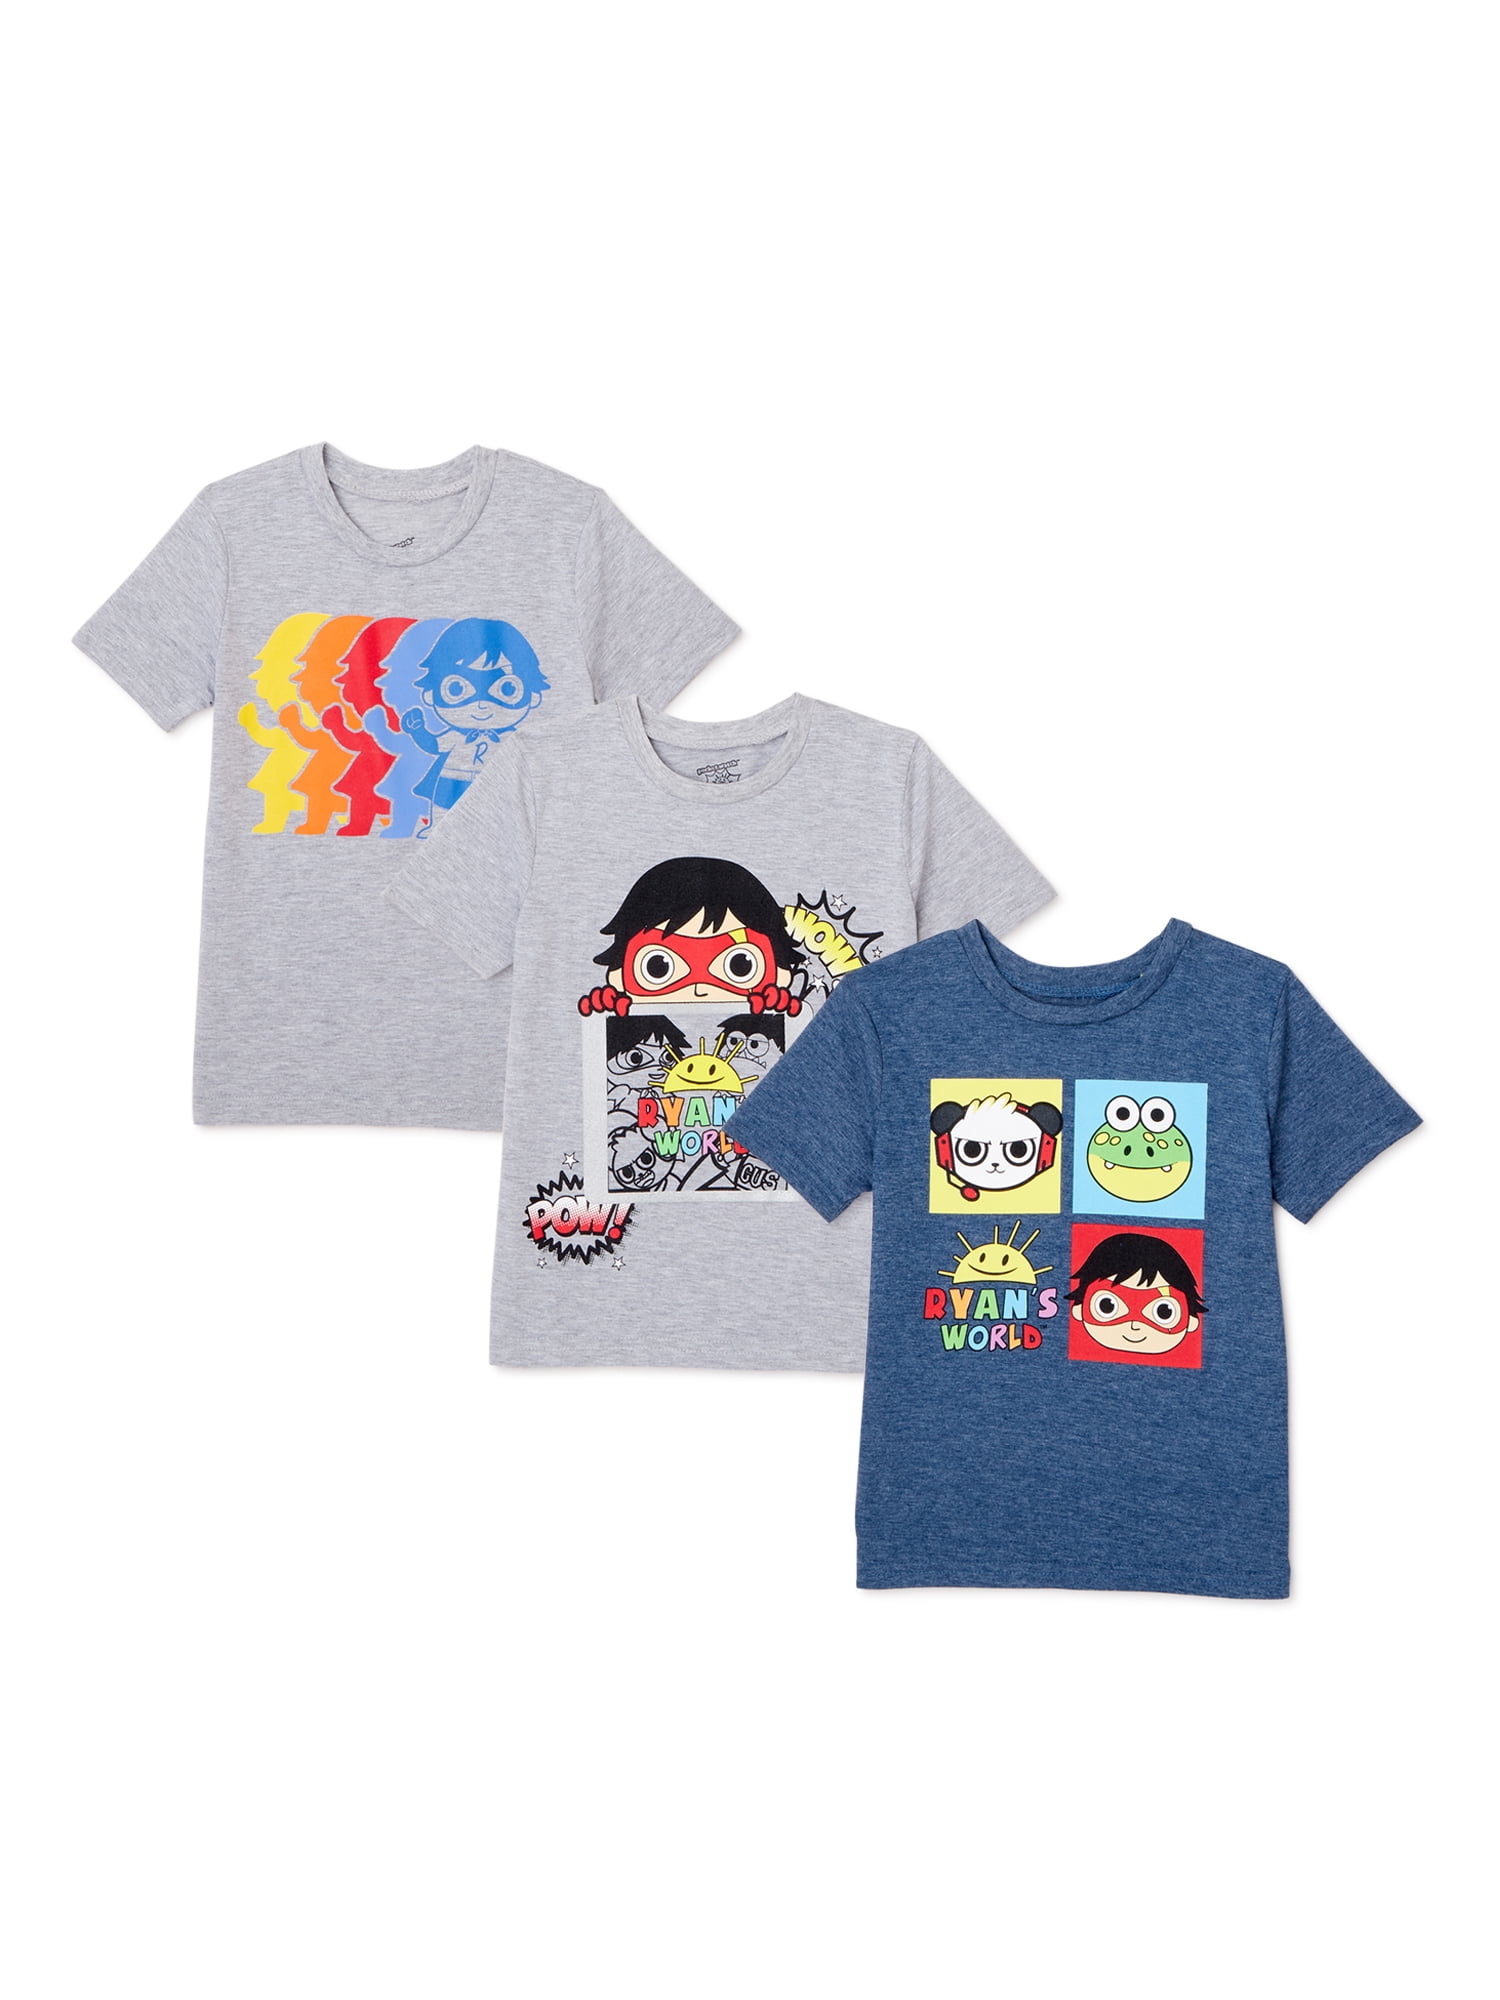 Ryan Toys Review kids T-Shirt Children tshirts Cotton Tee Tops party costume 